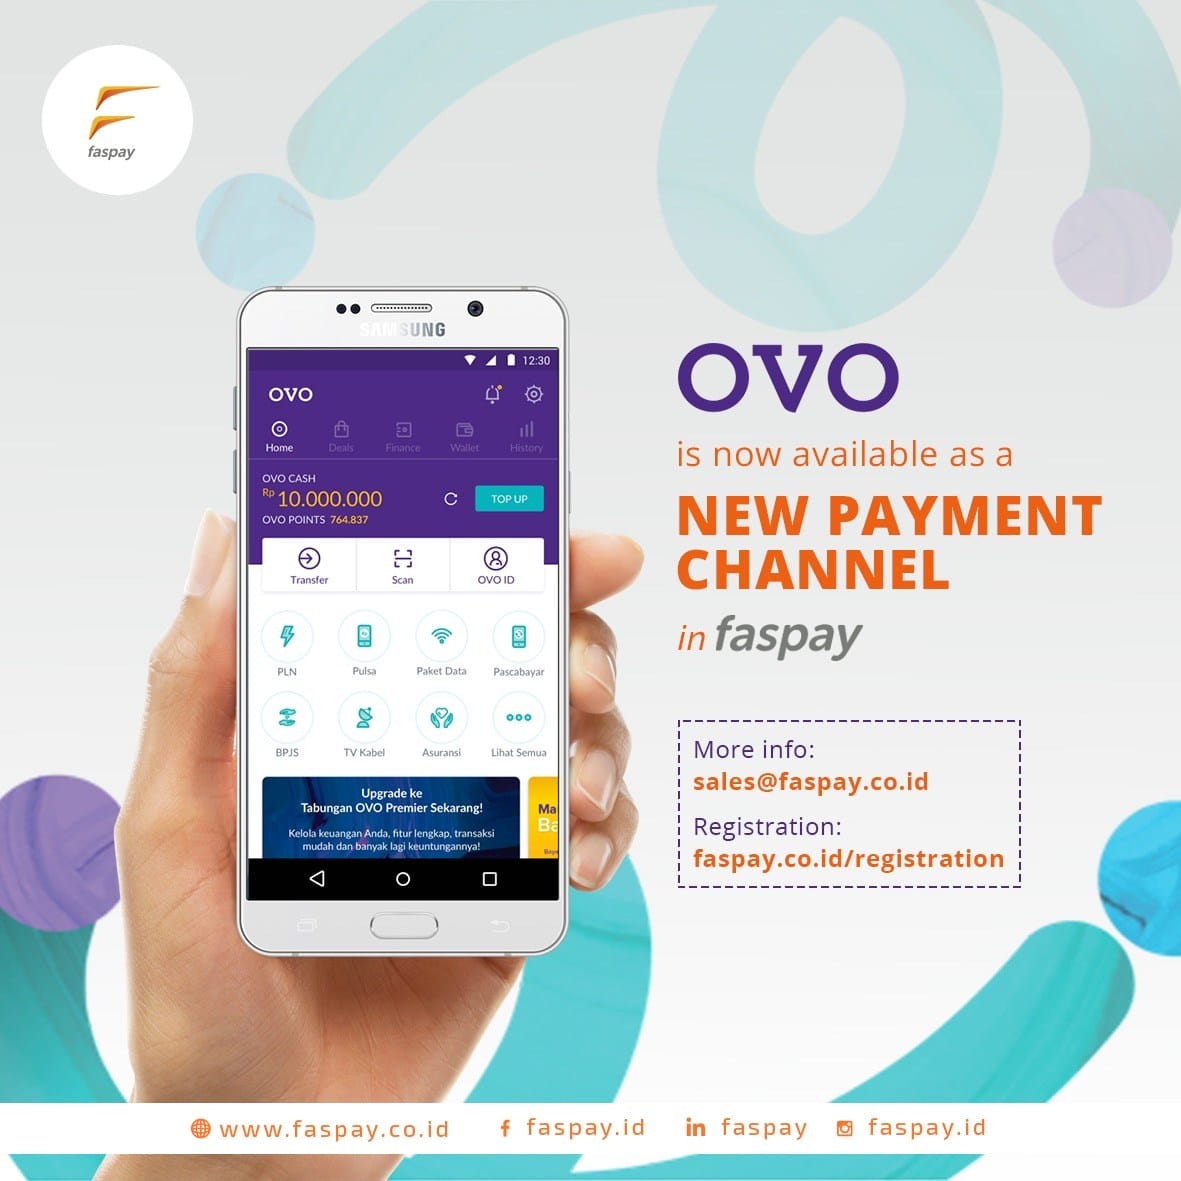 OVO is now available as the newest payment channel in FASPAY!